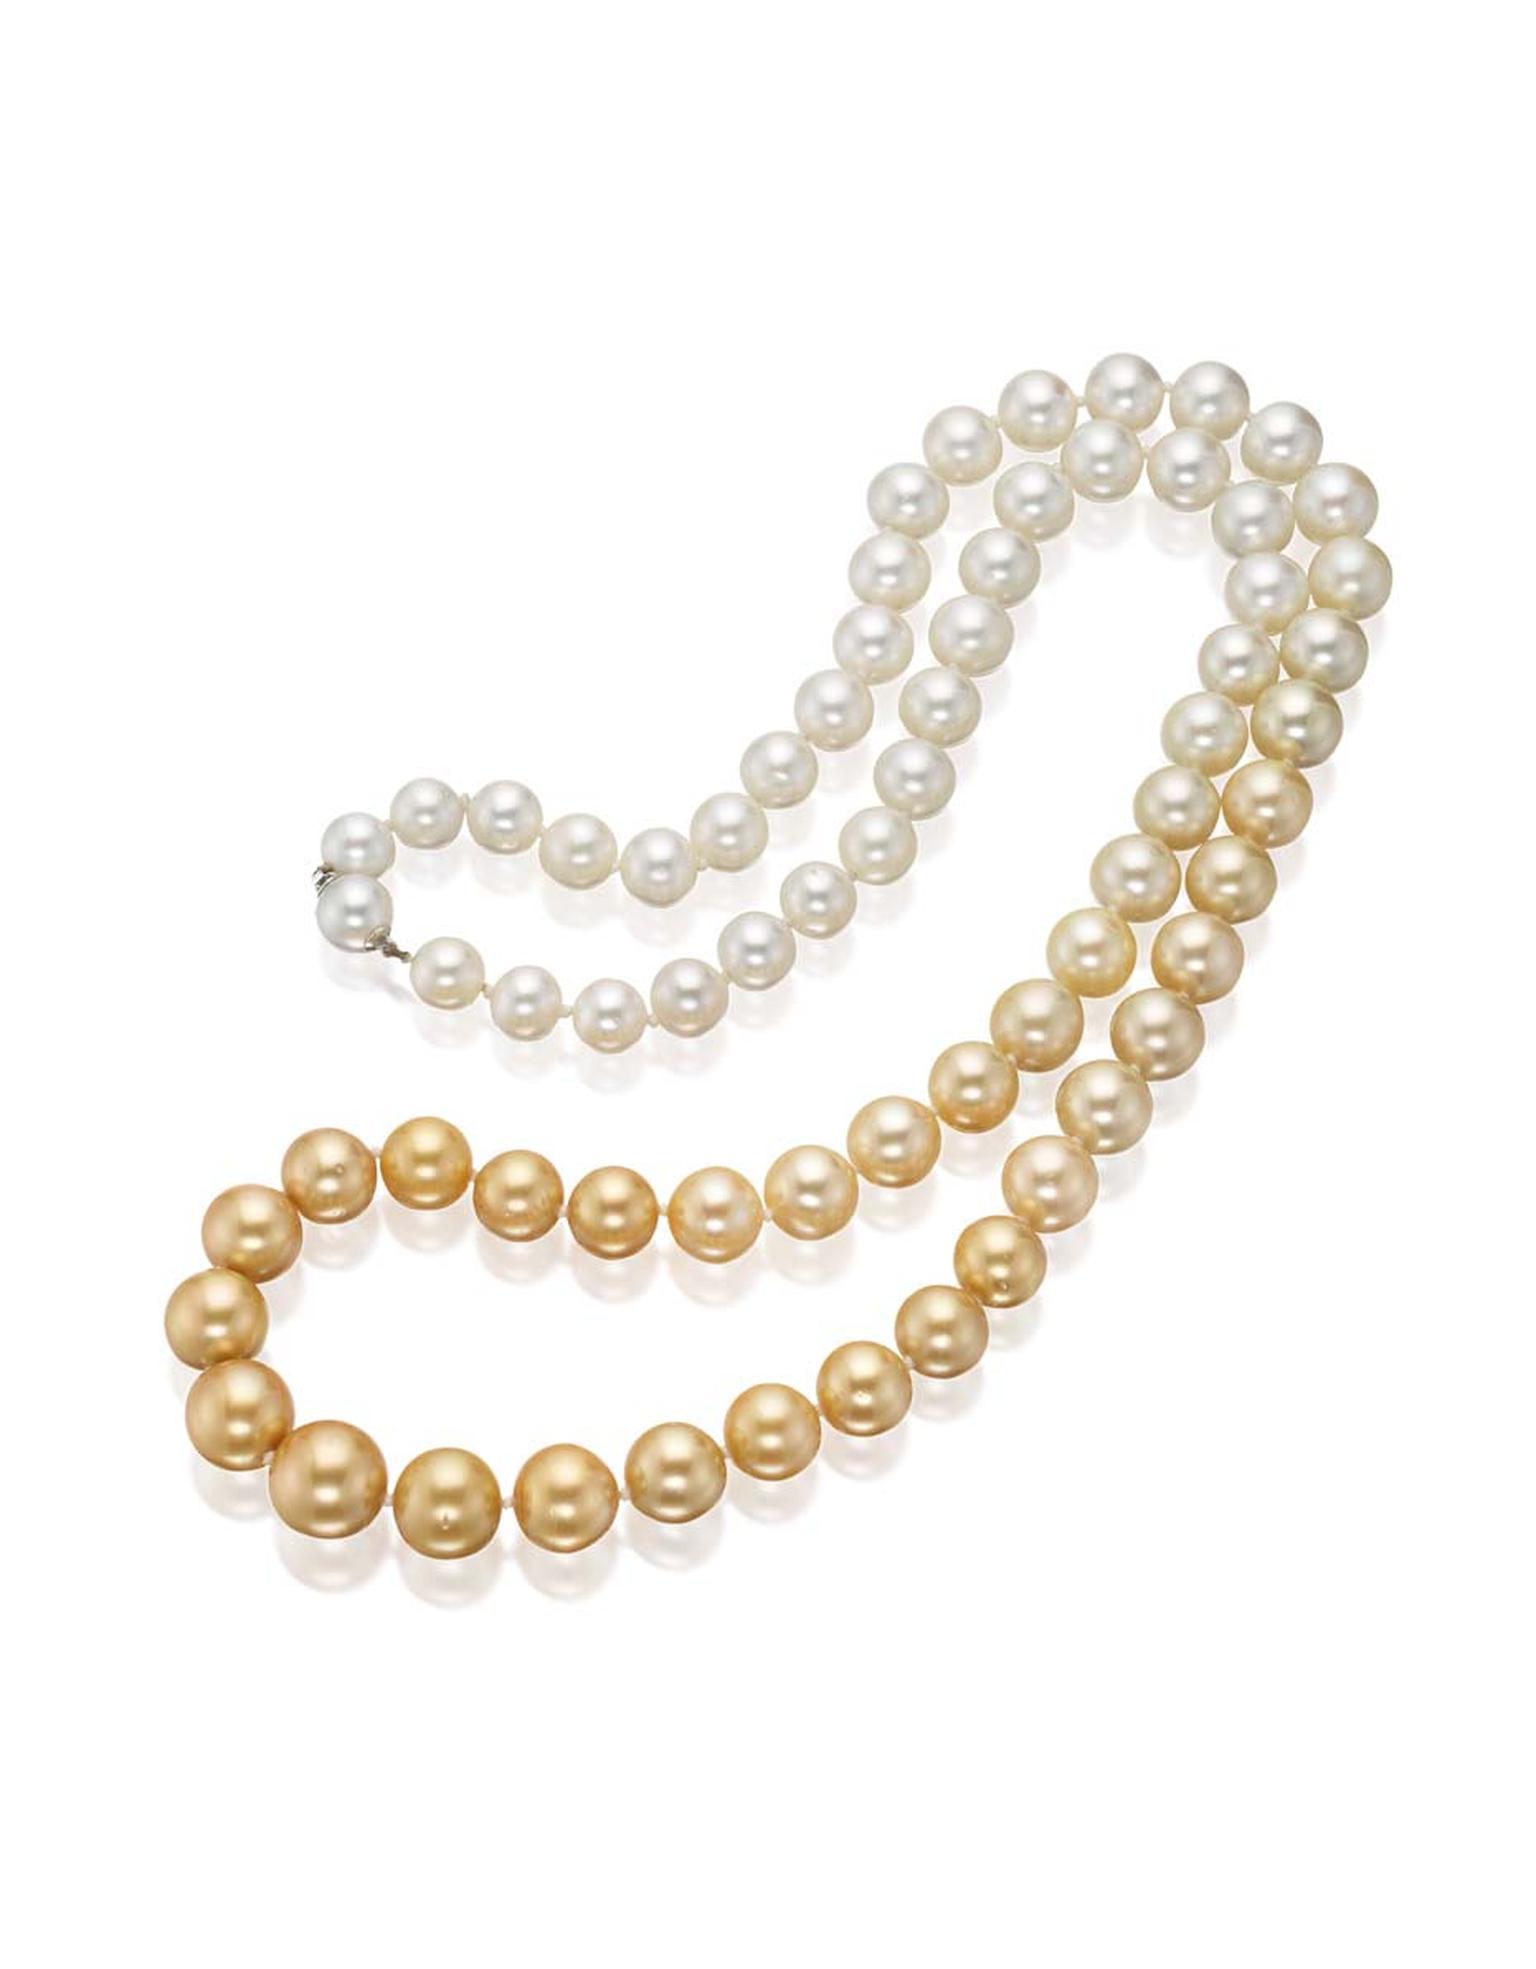 Marina B pearl necklace strung with 71 natural colour South Sea cultured pearls that graduate from gold to white (estimate: £11,700-15,600).